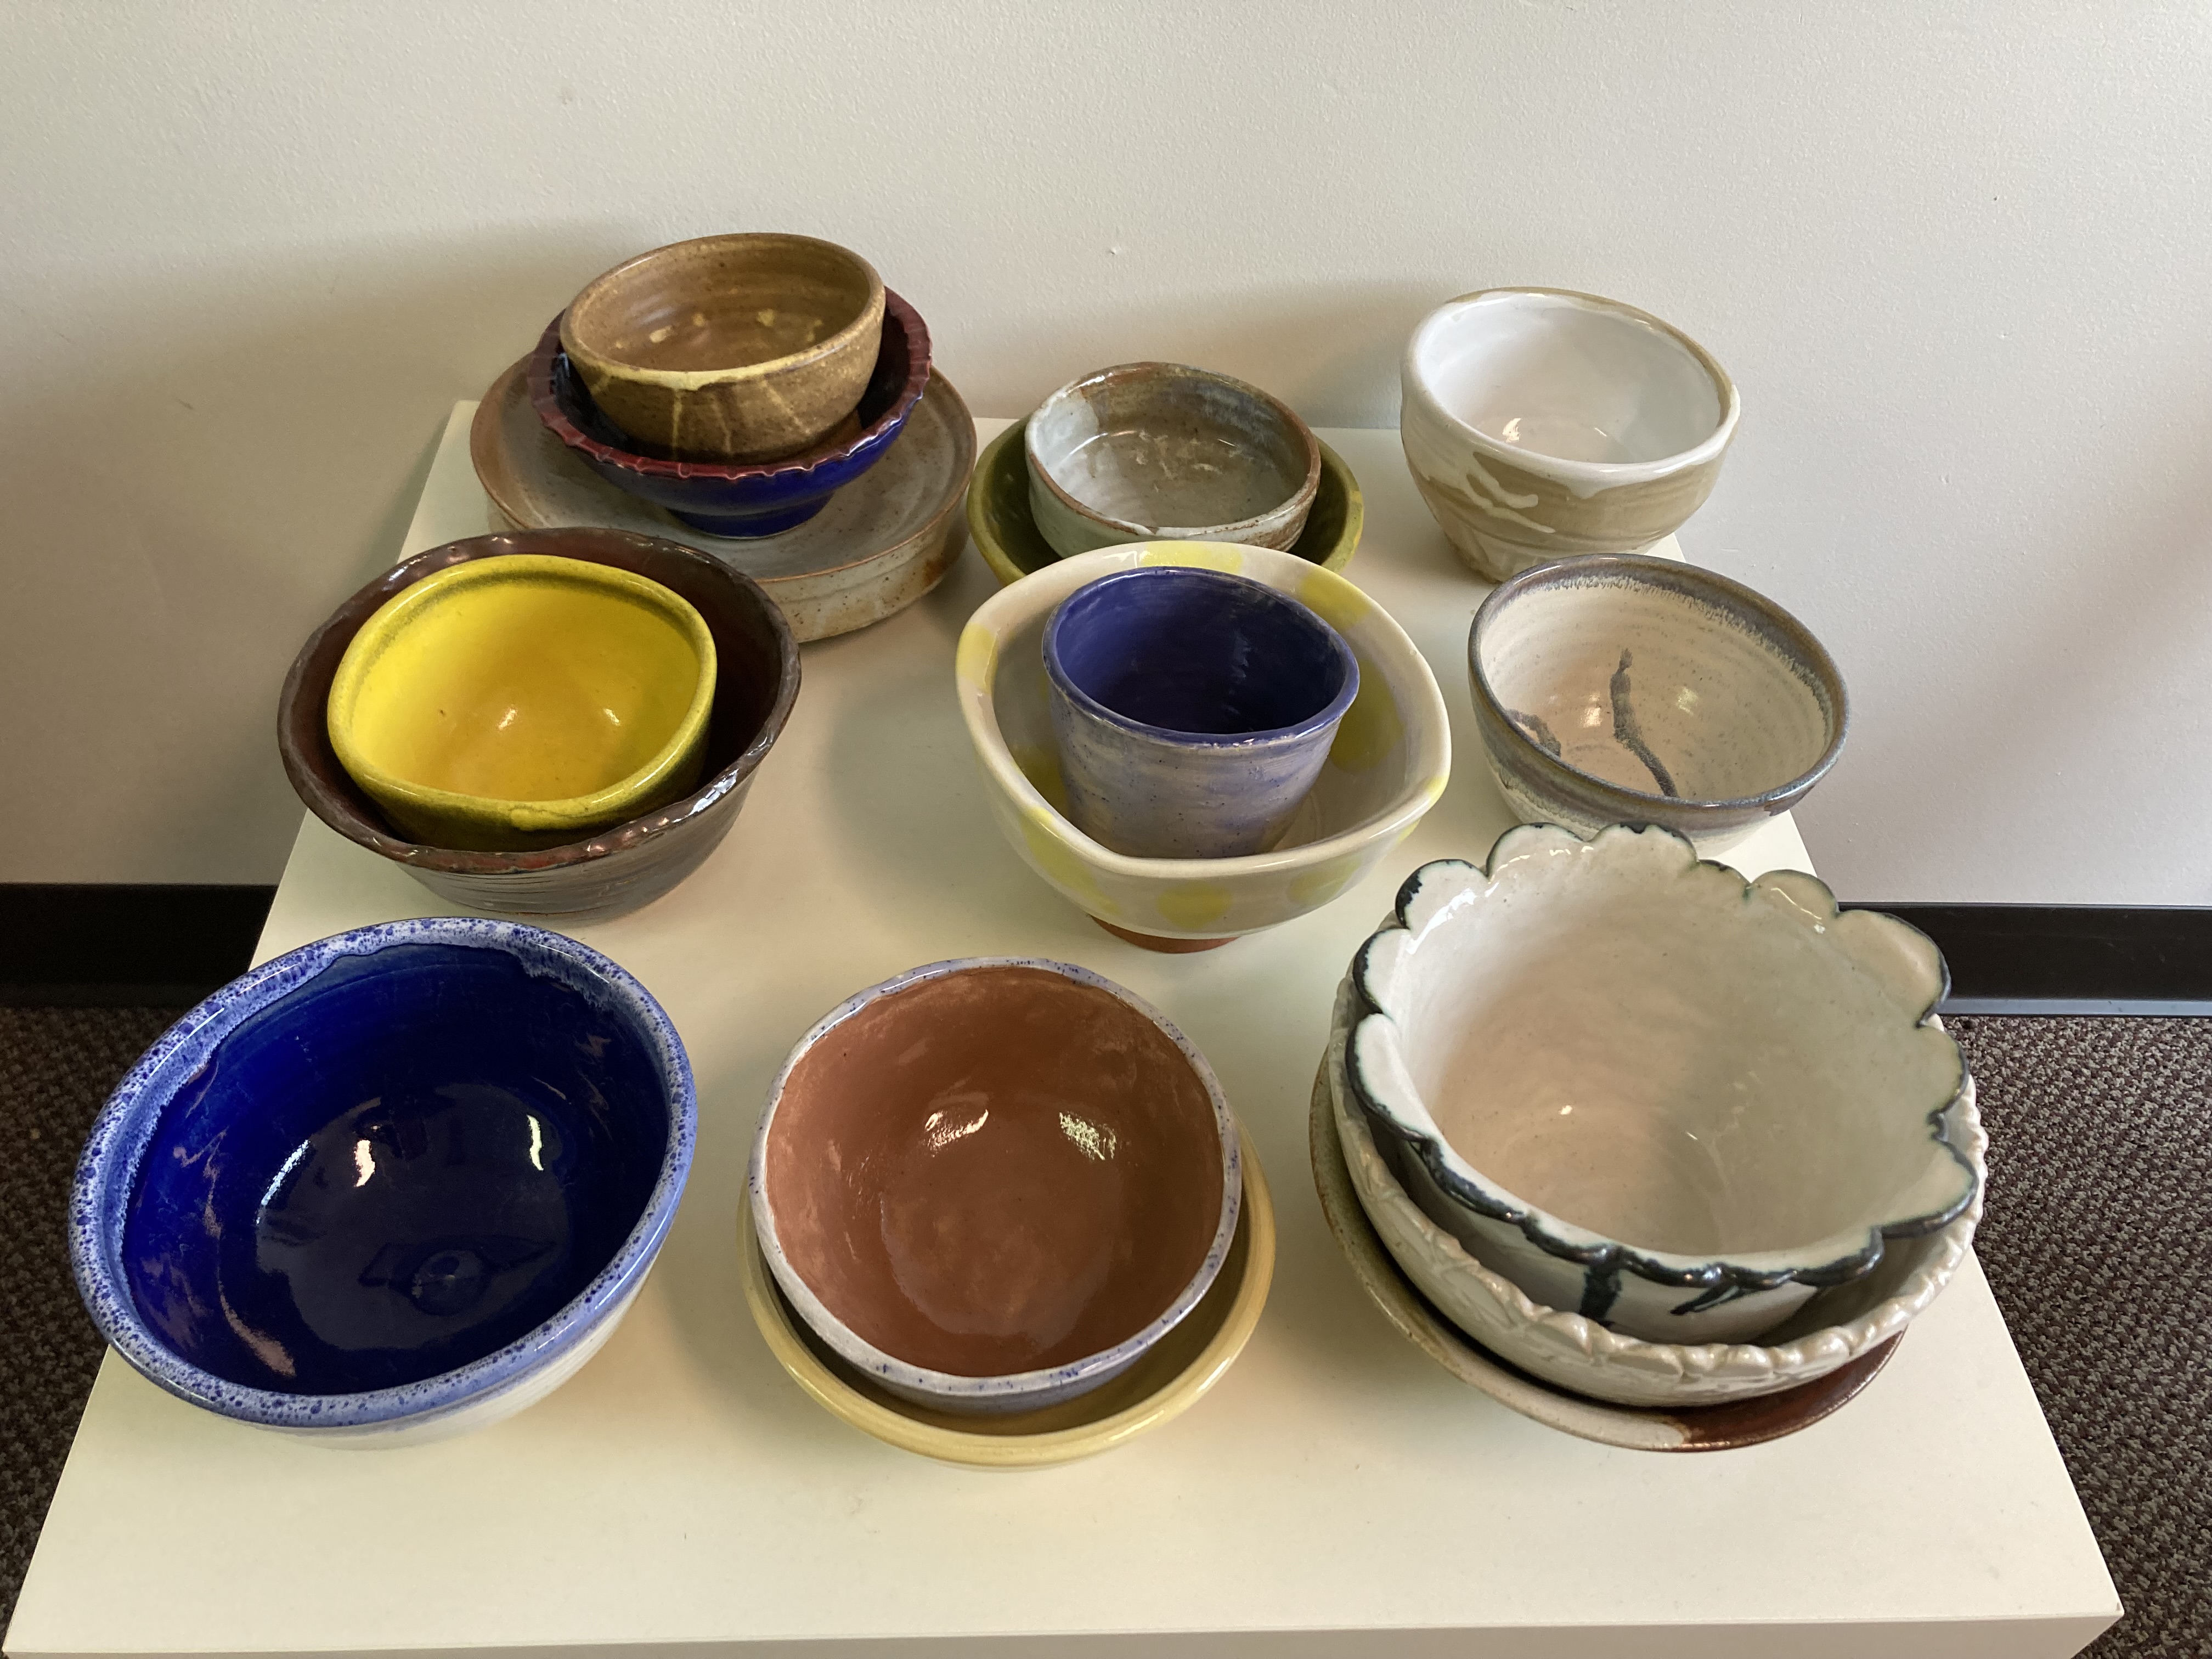 Image of pottery to be auctioned for charity fundraiser.